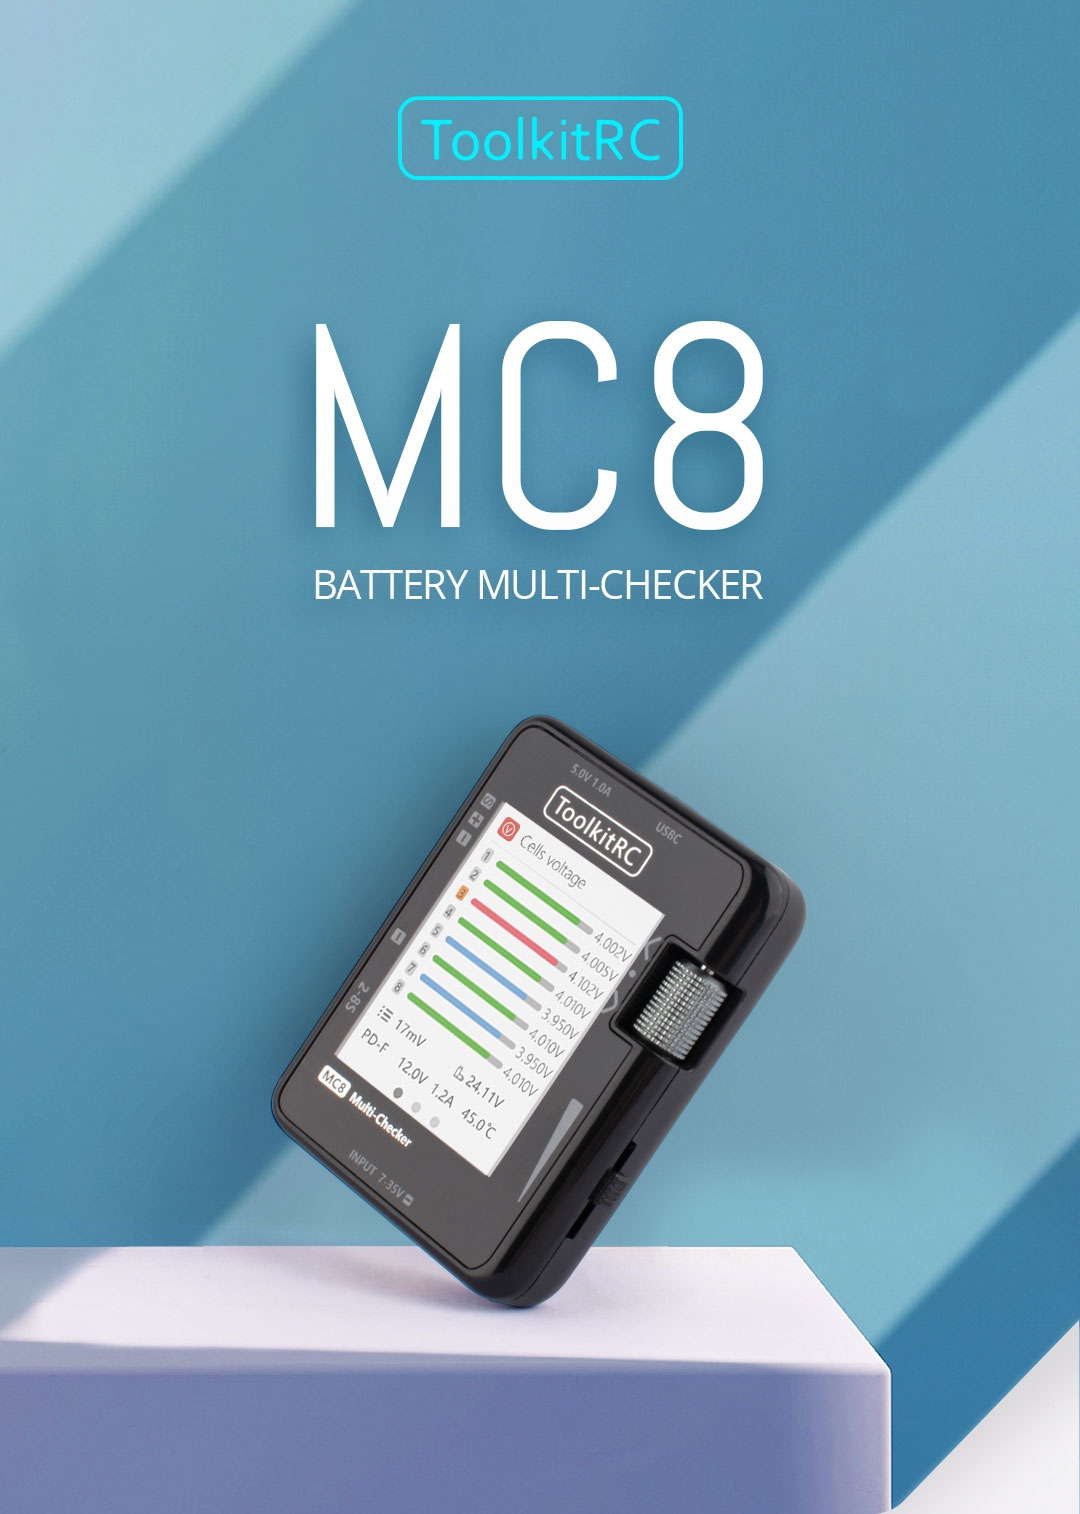 ToolkitRC MC8 Mini Size Cell checker 32 Bit Battery Multi-Checker PWM Output PPM SBUS Readout With USB-C Fast Charging